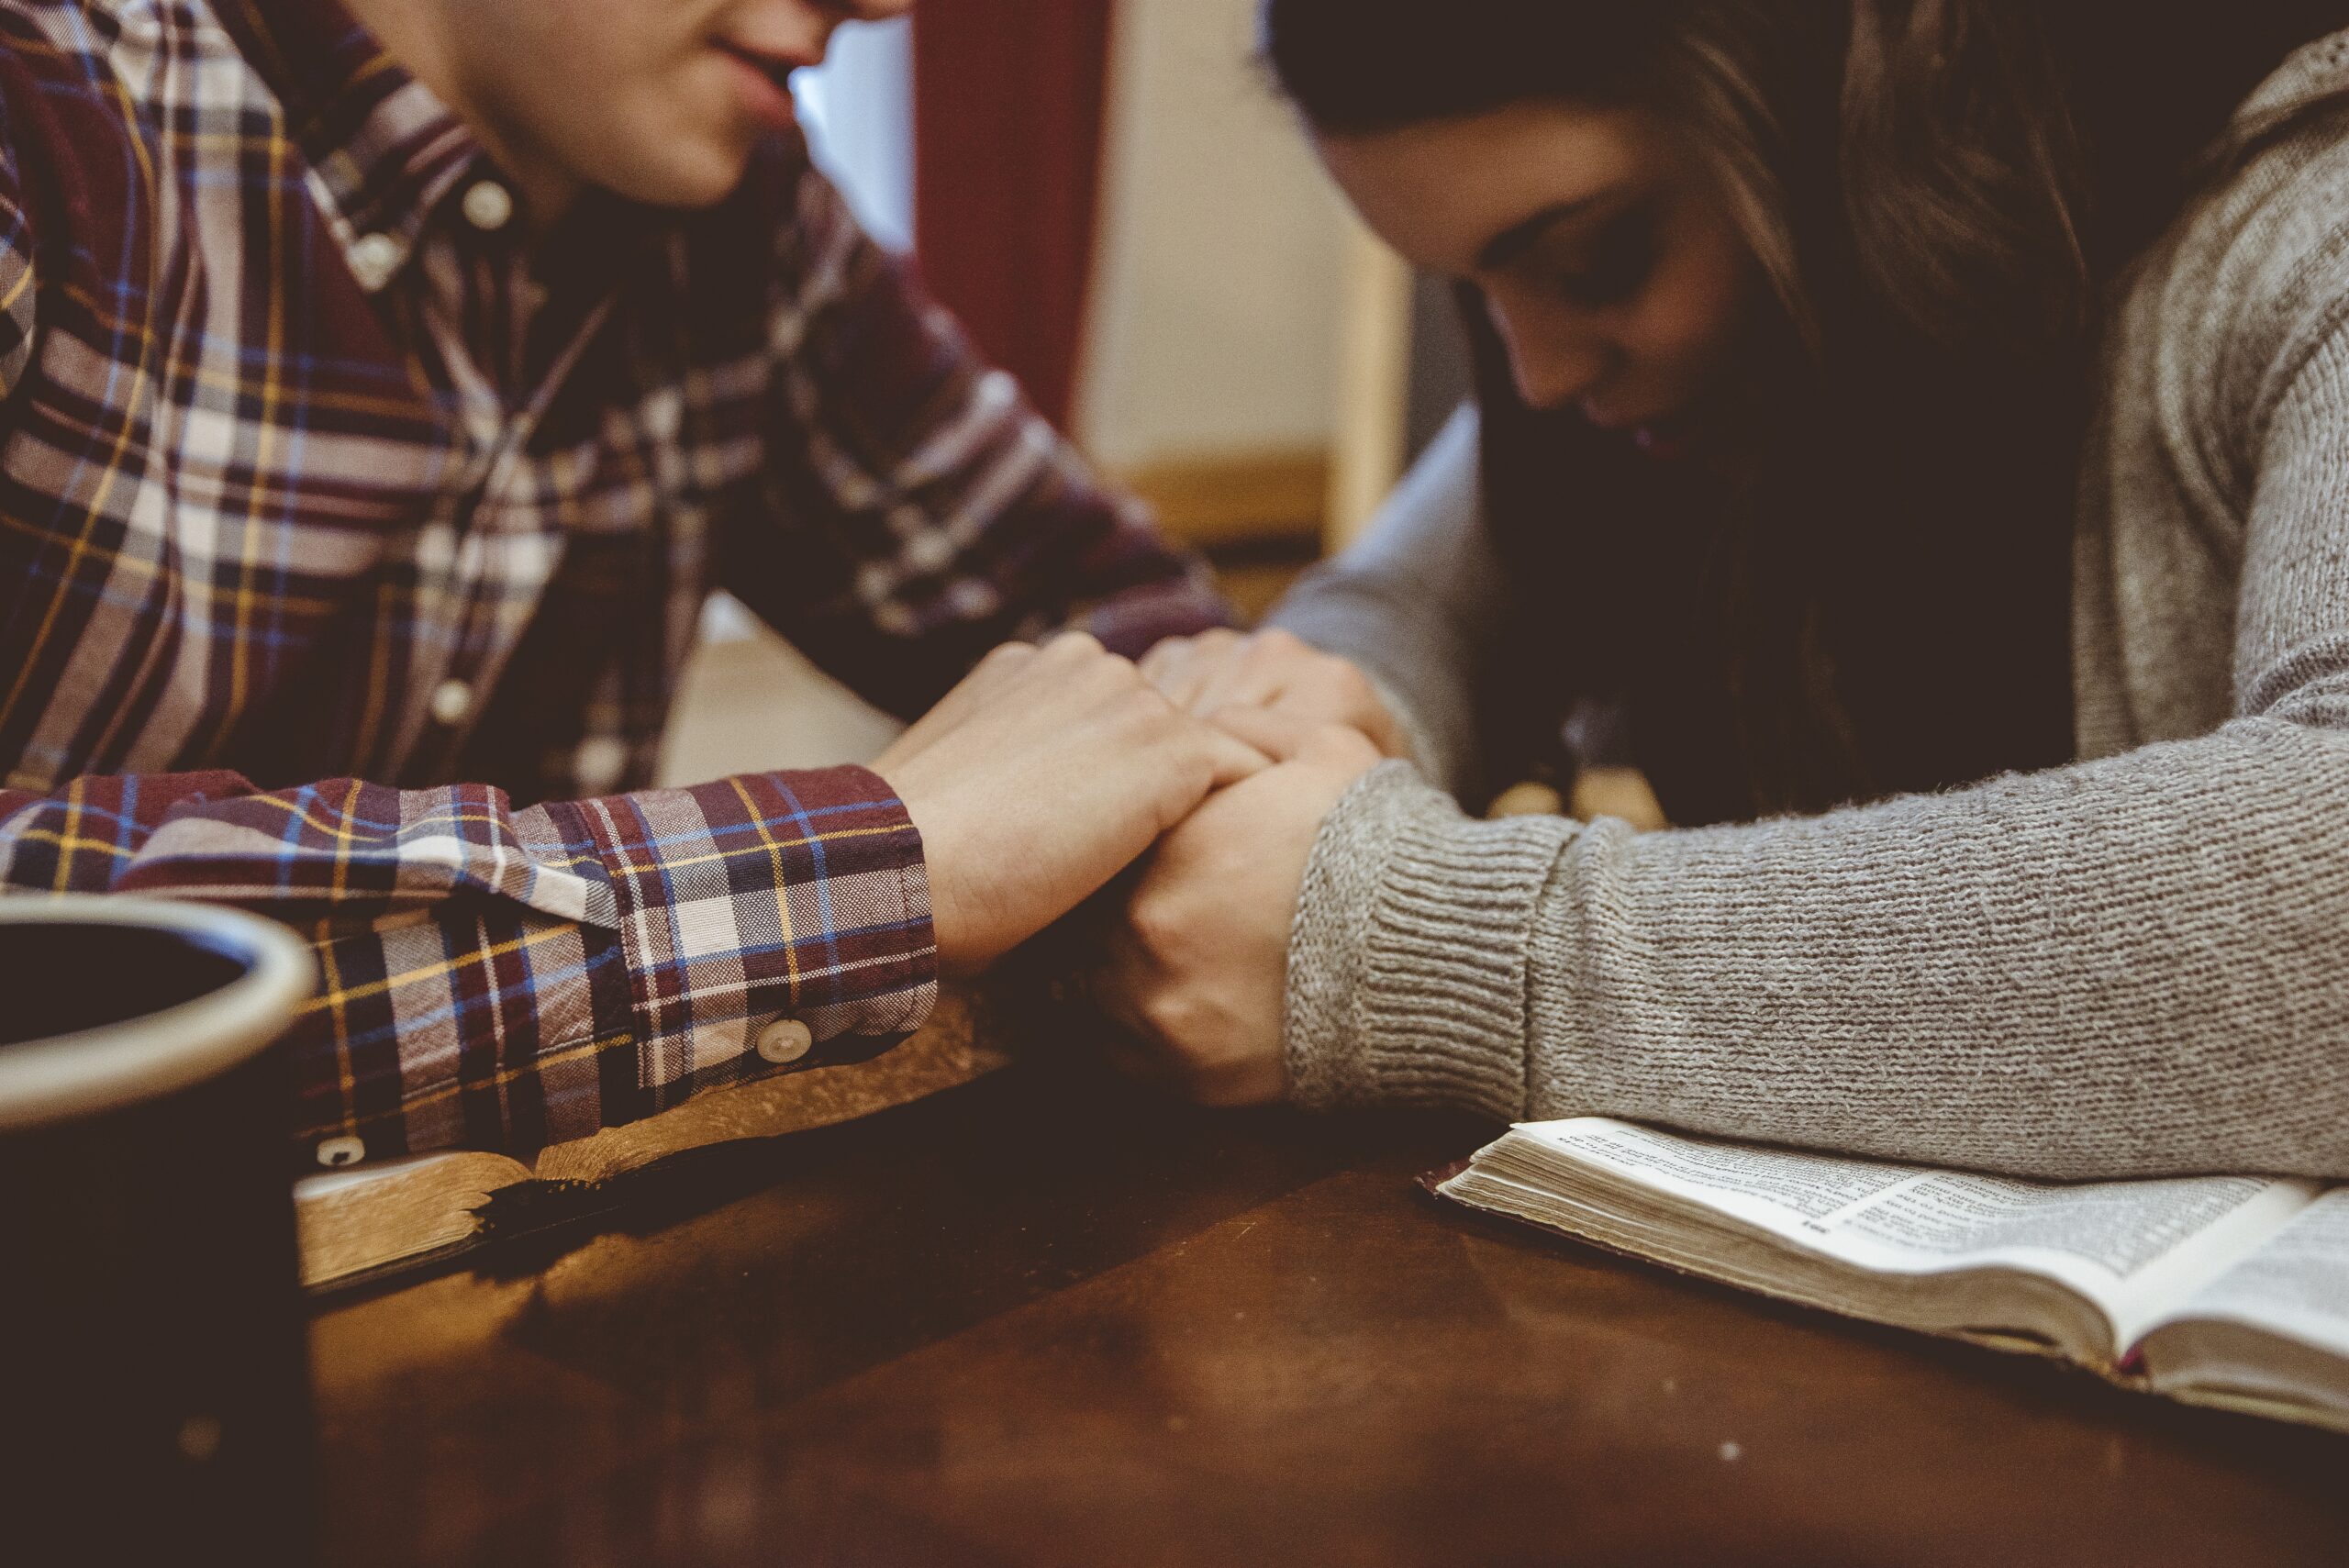 Strengthen your marriage through the power of prayer